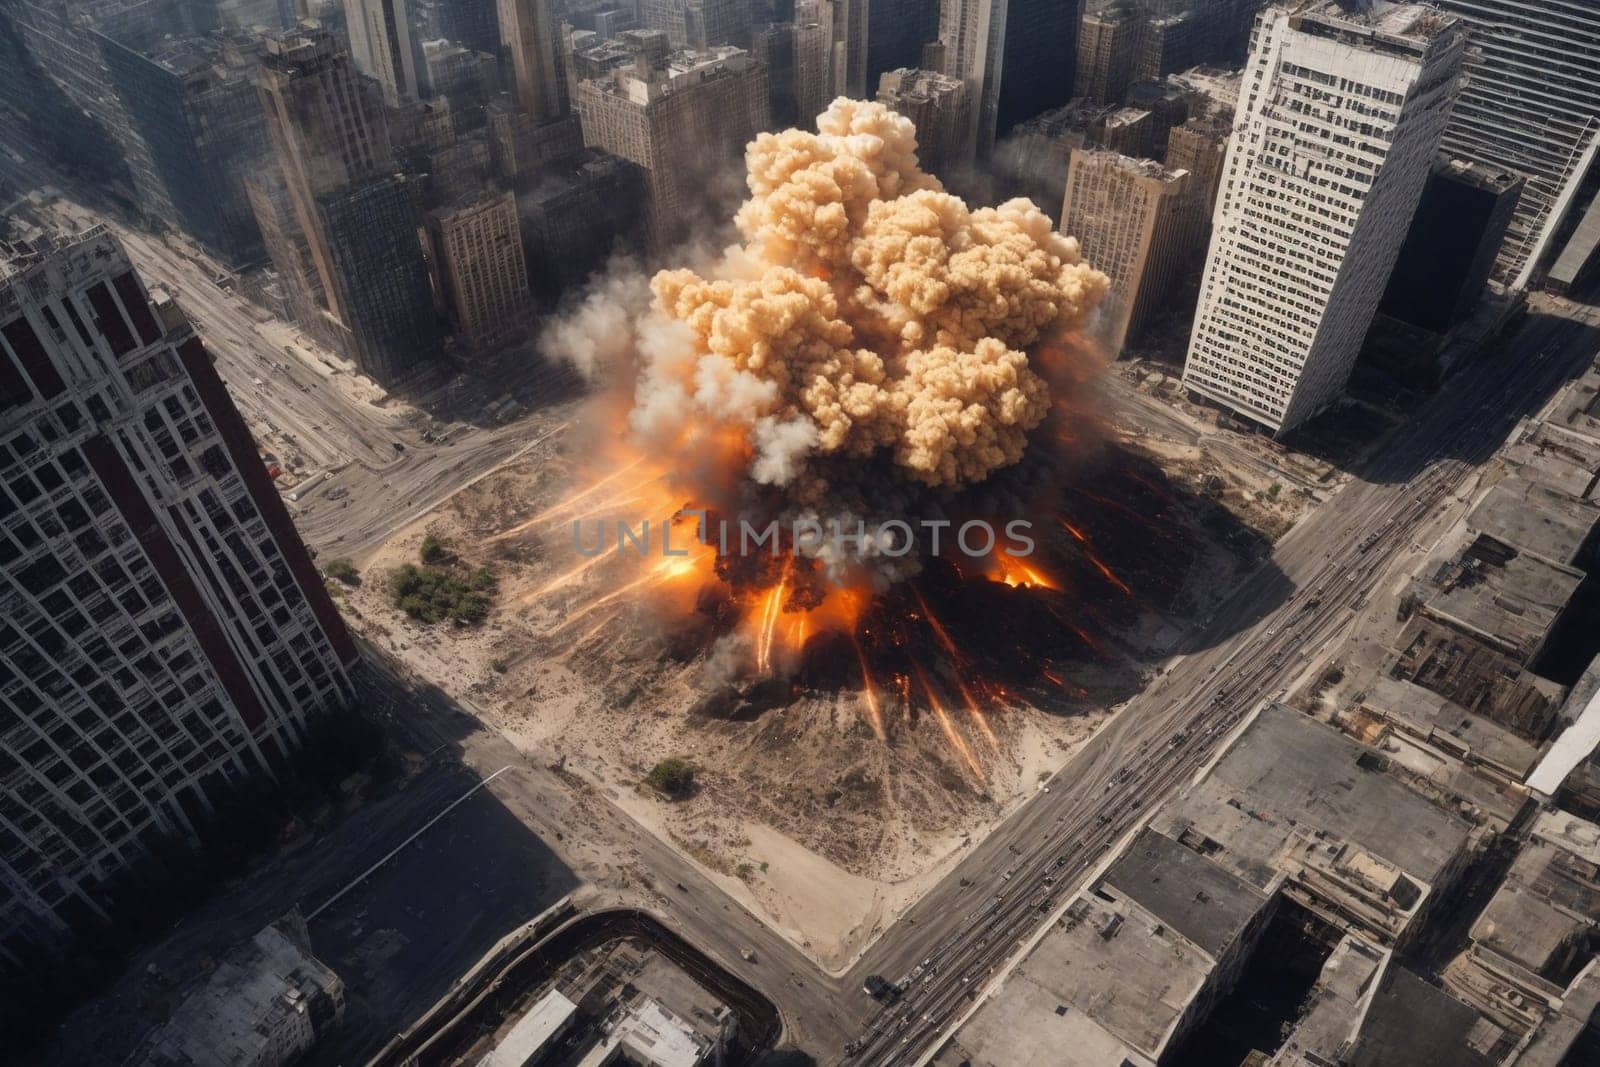 A colossal explosion erupts in the heart of a bustling city, leaving destruction and panic in its wake.